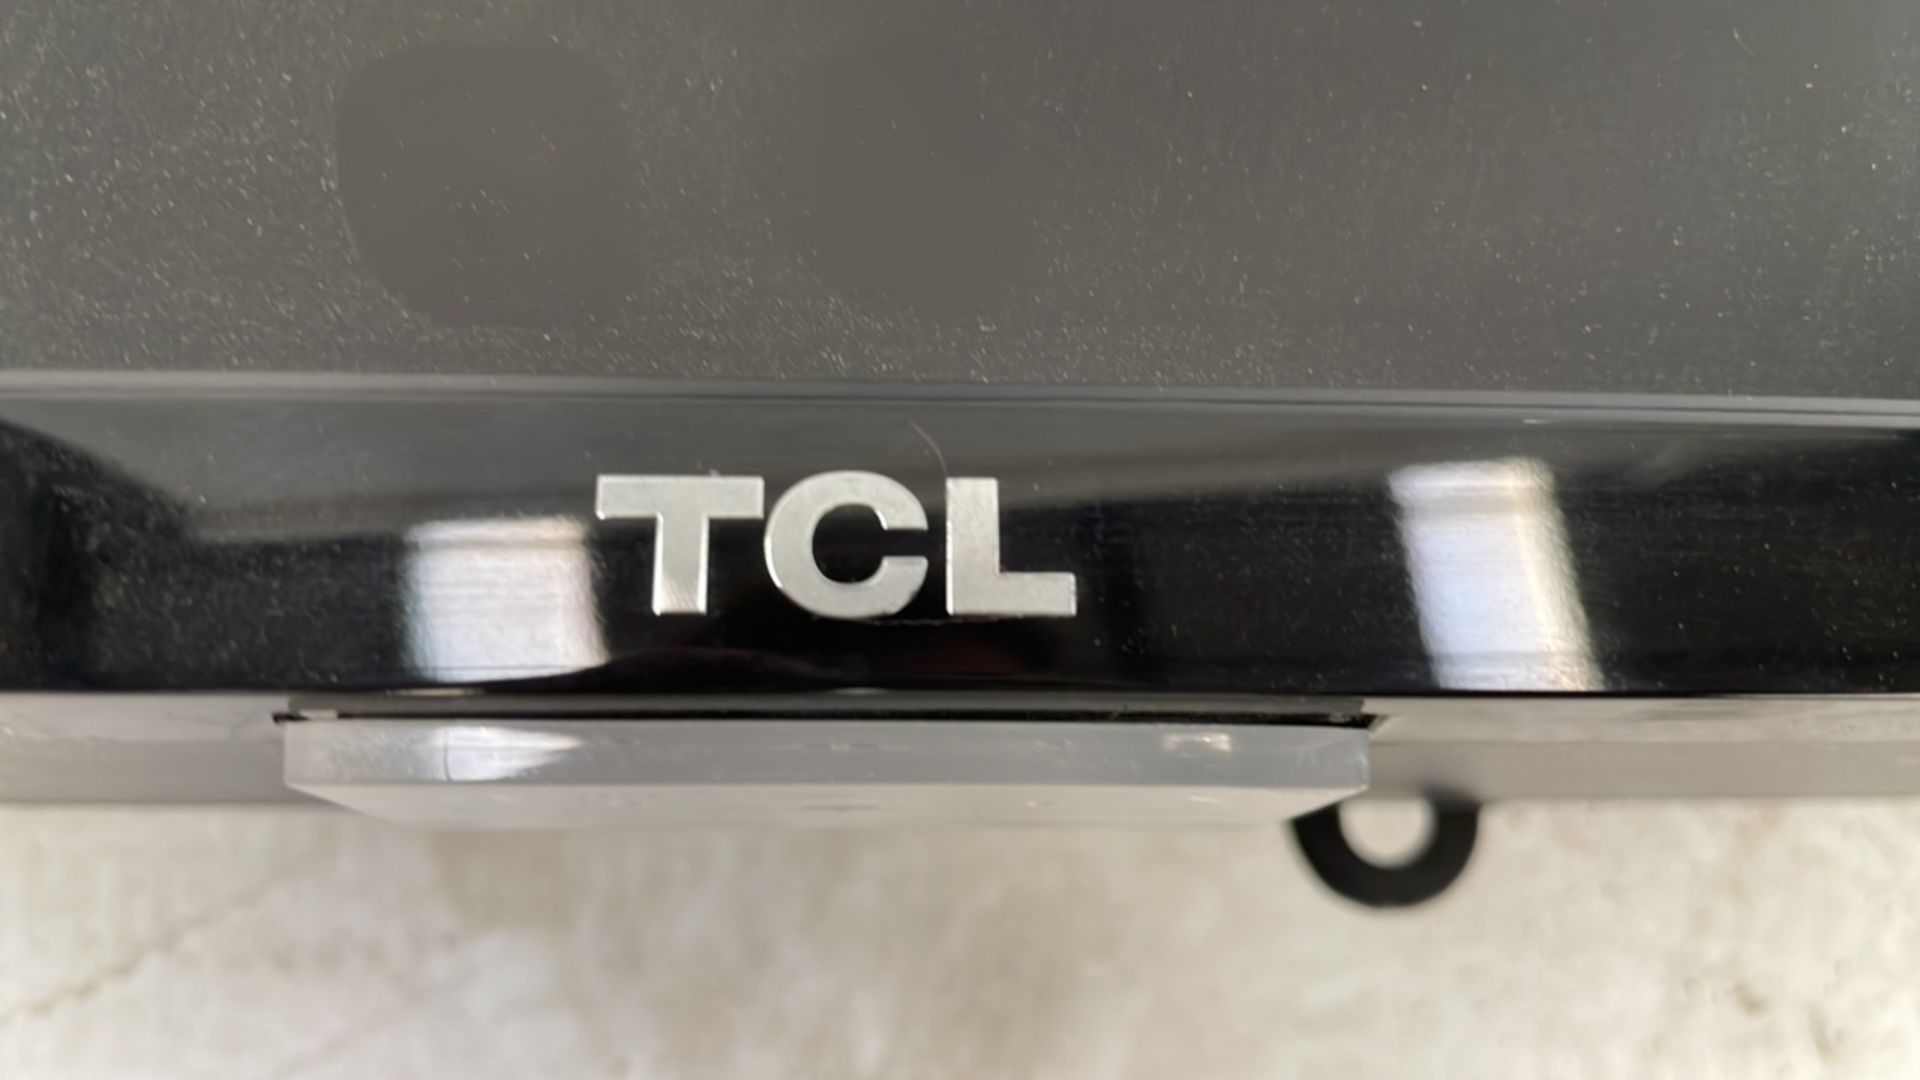 TCL tv - Image 7 of 8